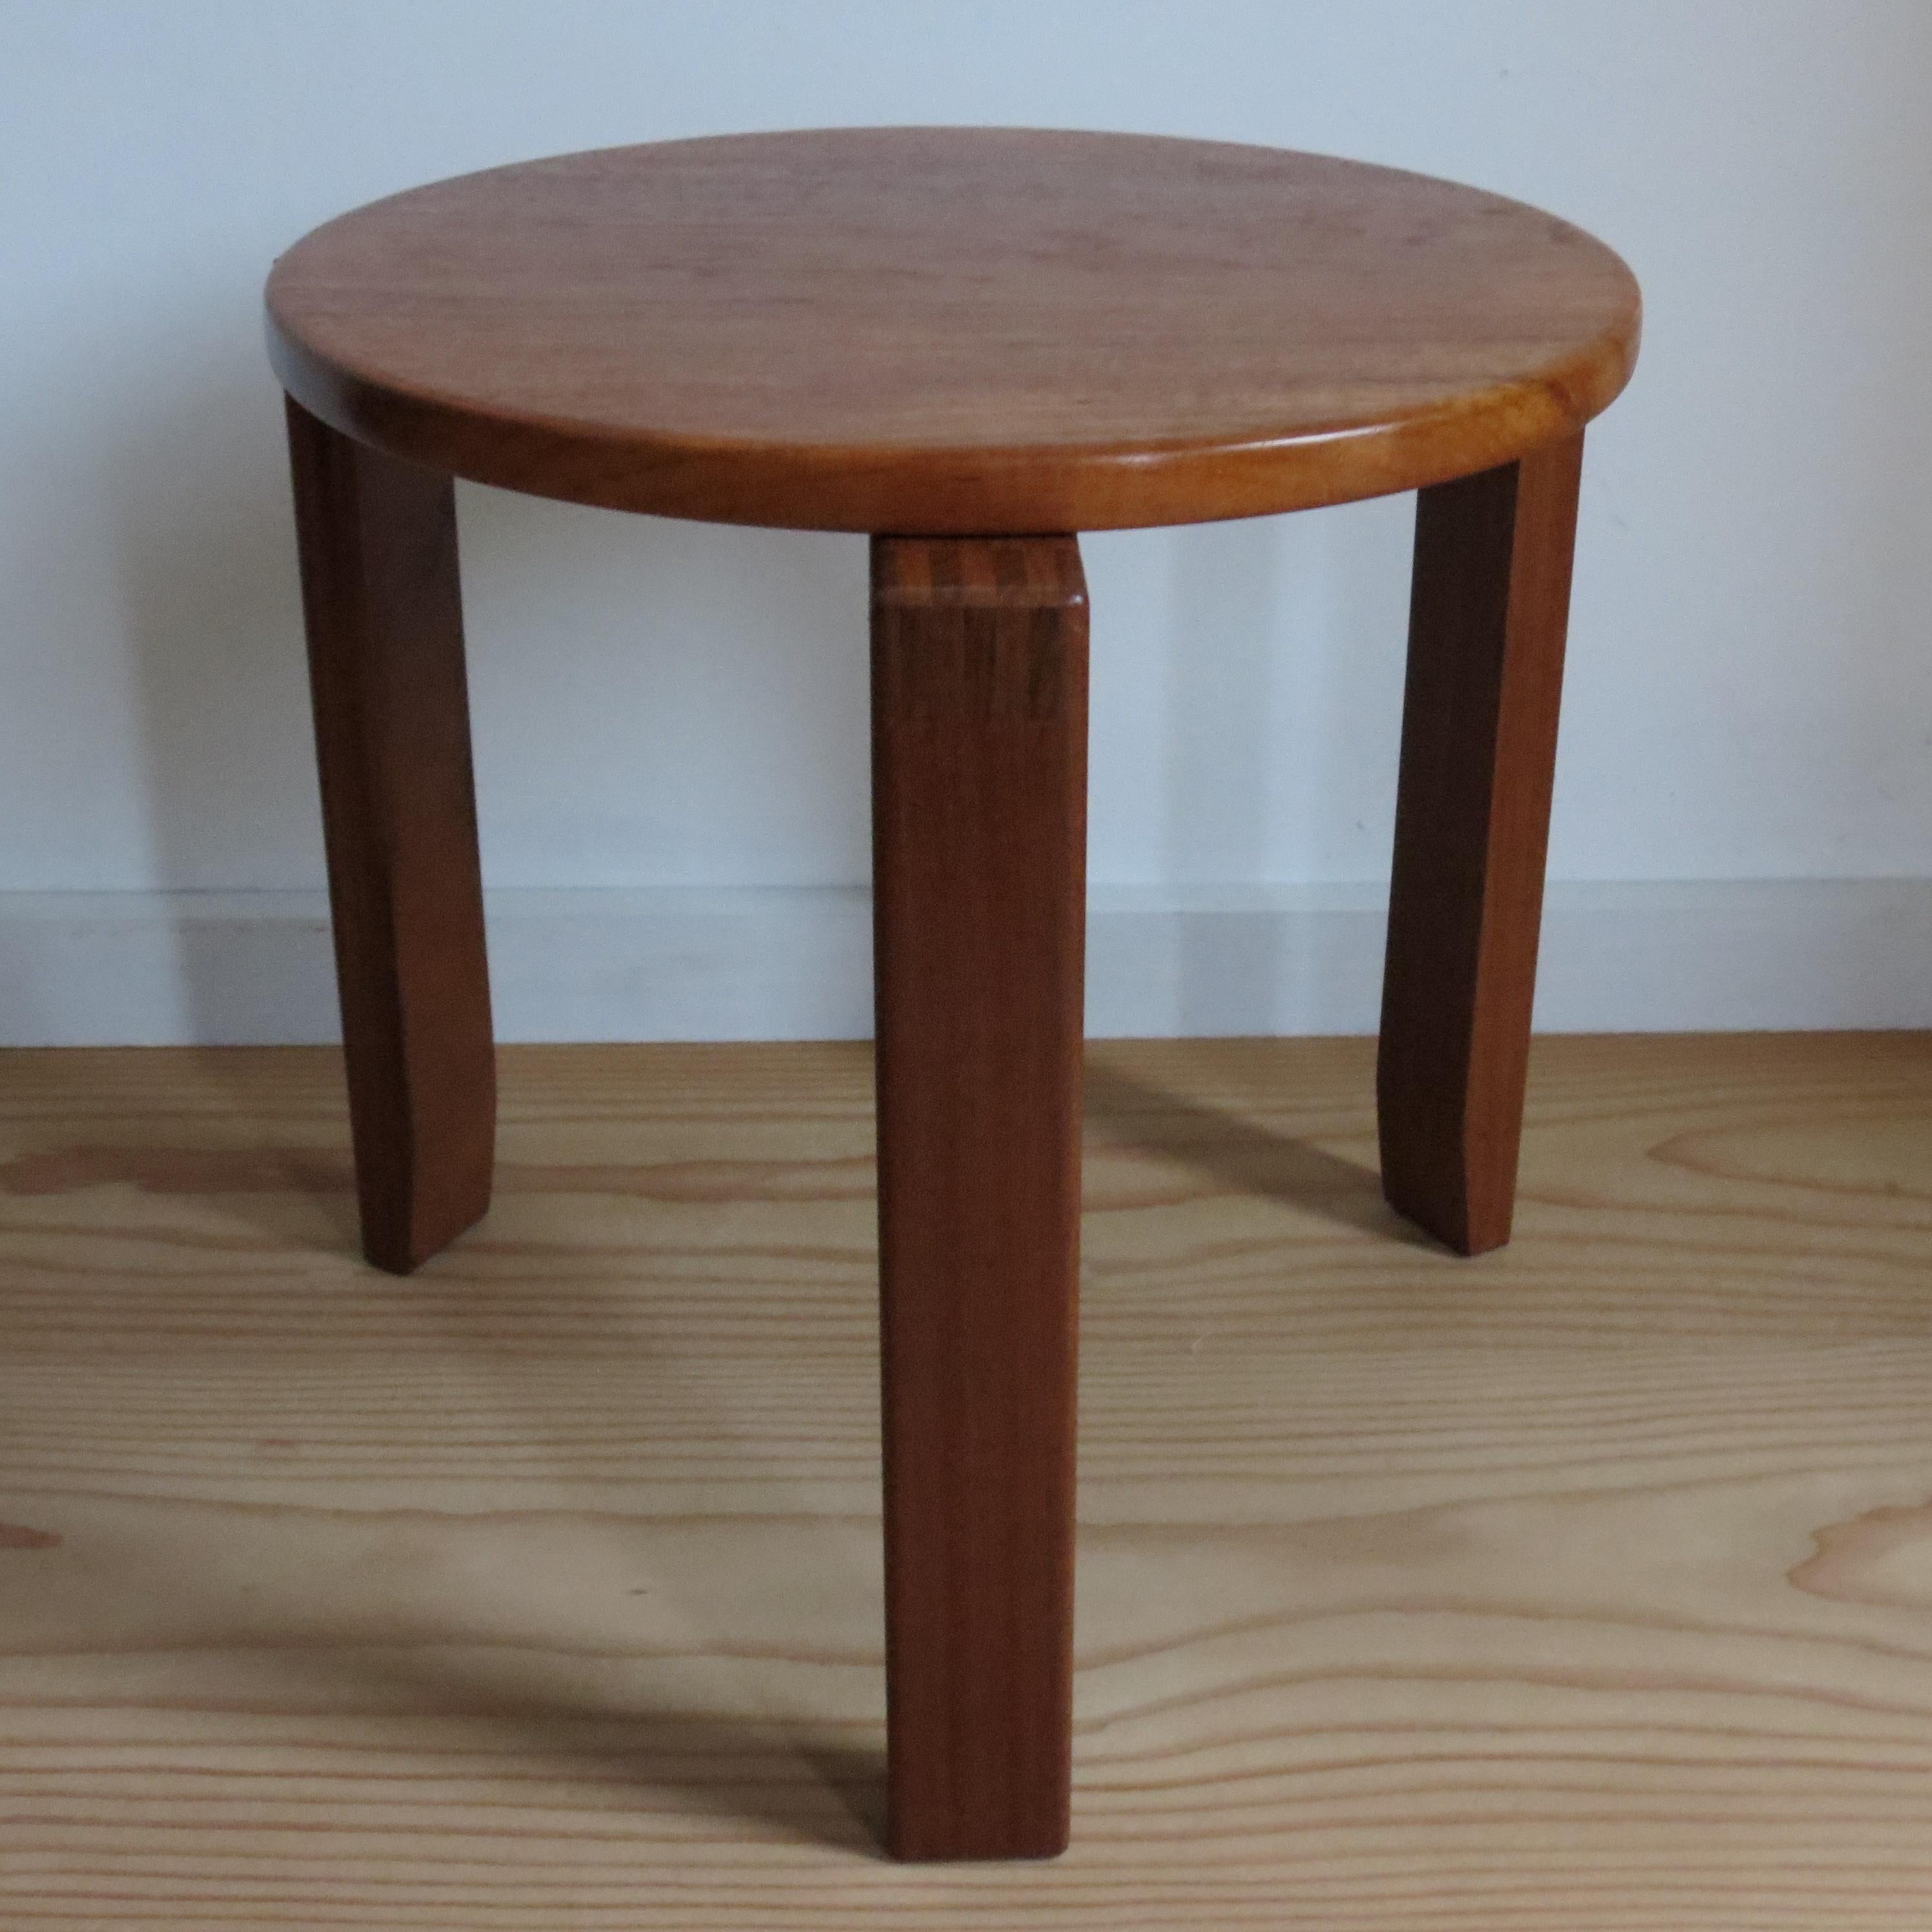 1960s Mid-century Small Circular Three Legged Table in Afromosia and Teak For Sale 4